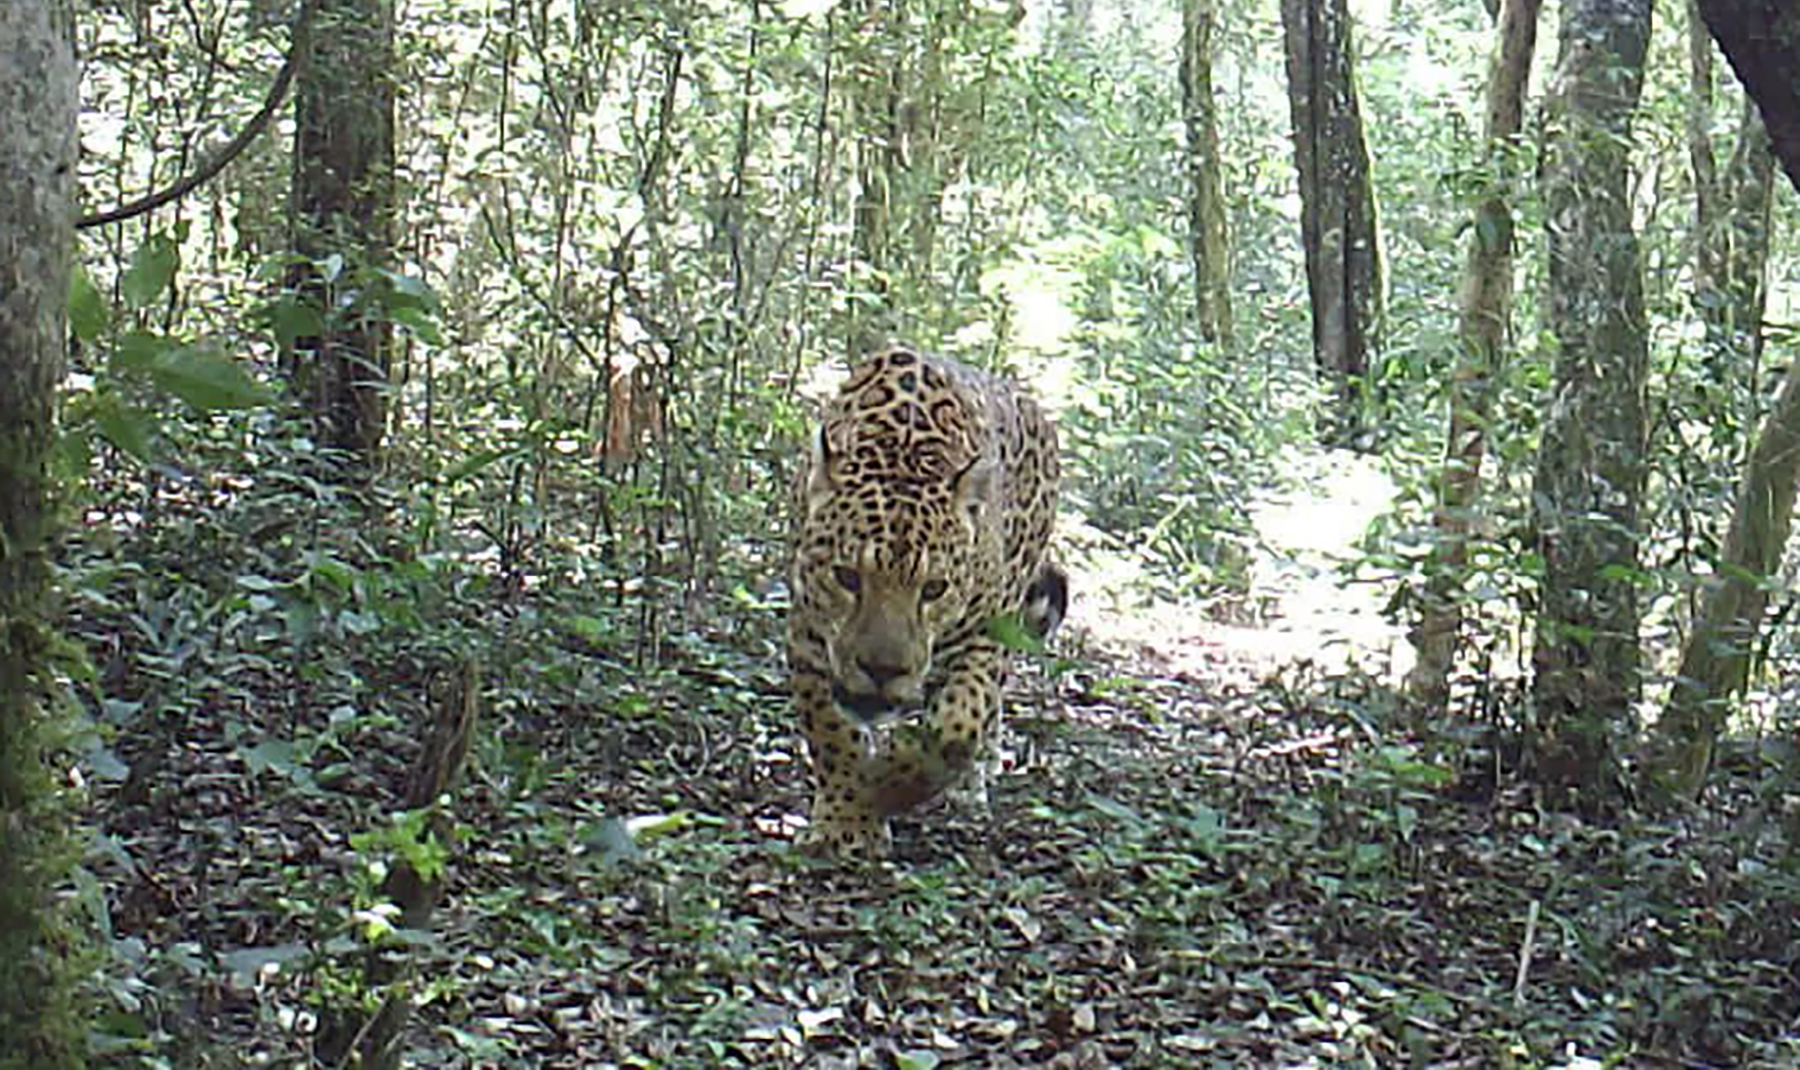 The jaguar (Panthera onca) is the largest feline of the Americas, and this top predator is a near threatened species due to its decreasing population. Our partner, Fundacion Vida Silvestre, has been working in Upper Parana since 2006 with support from WWF Latin America to increase and stabilize jaguar populations.